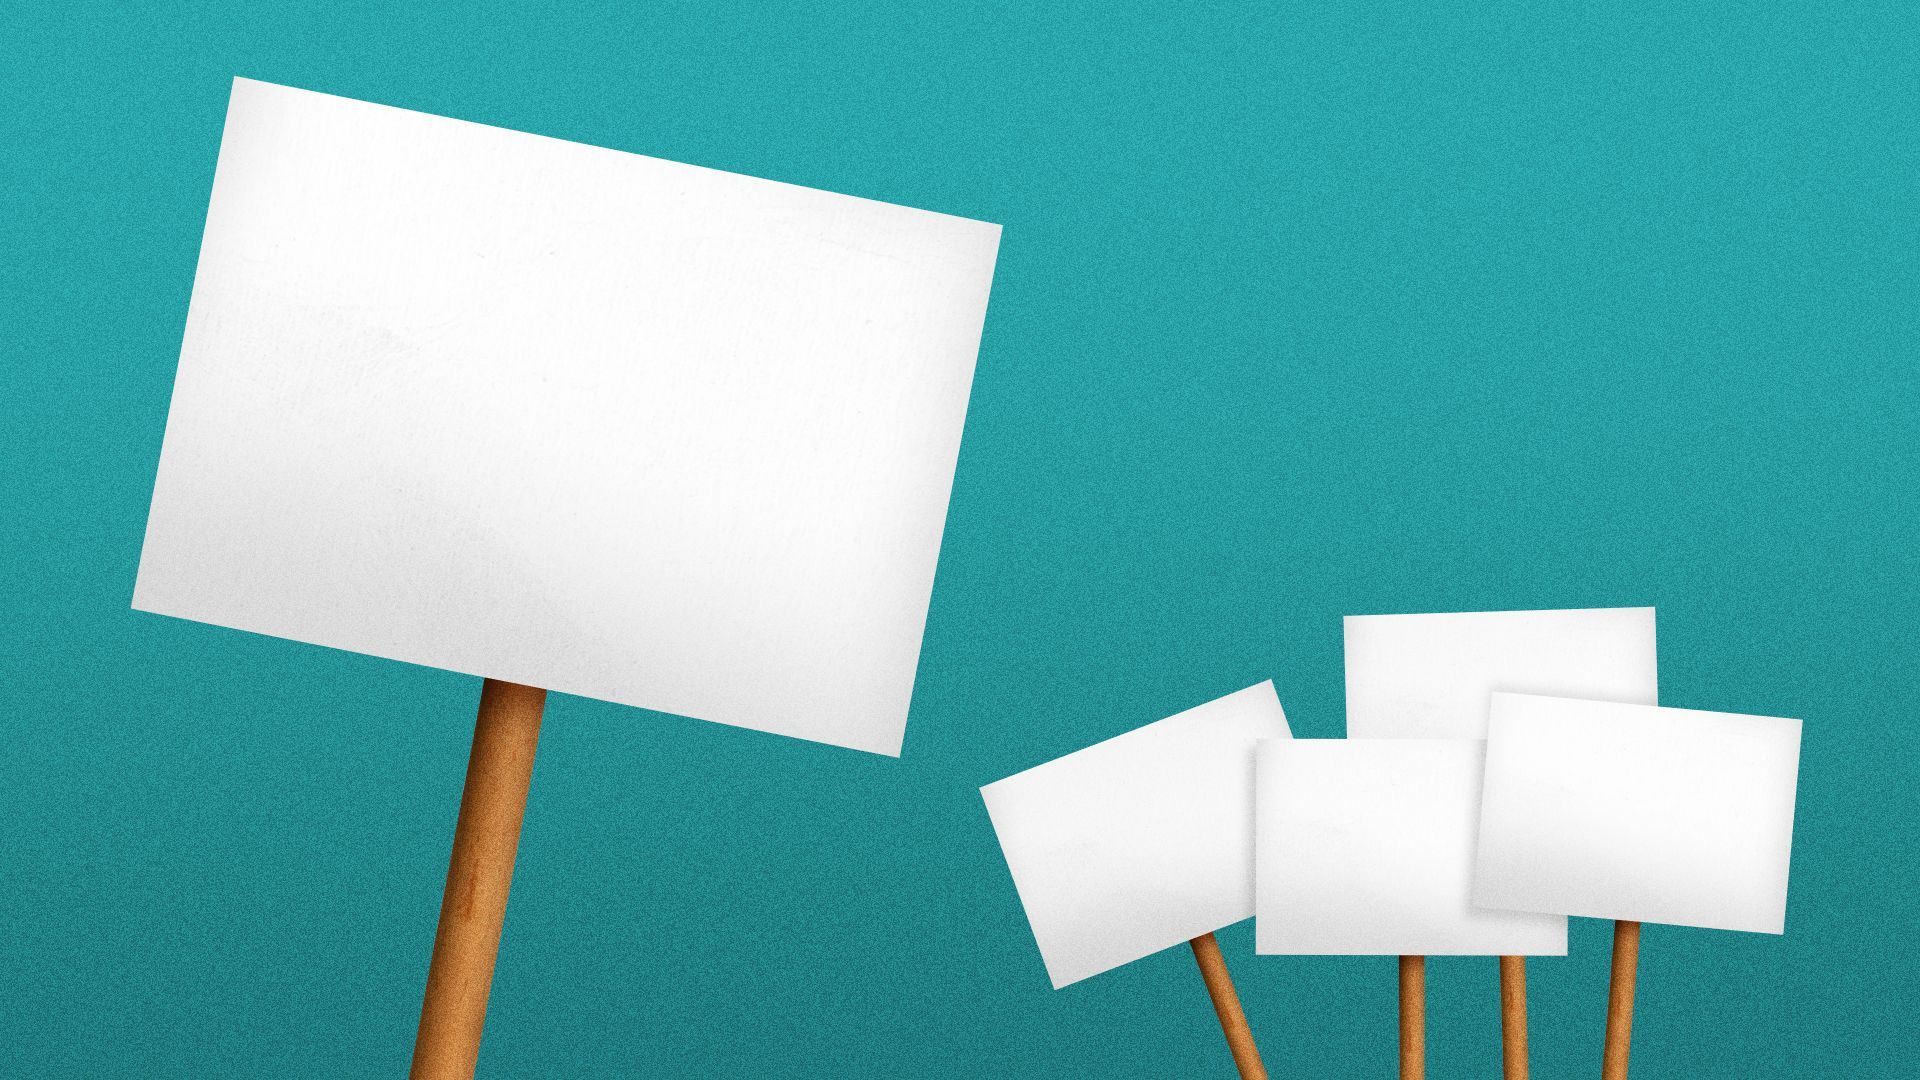 Illustration of a large picket sign next to a group of smaller picket signs.